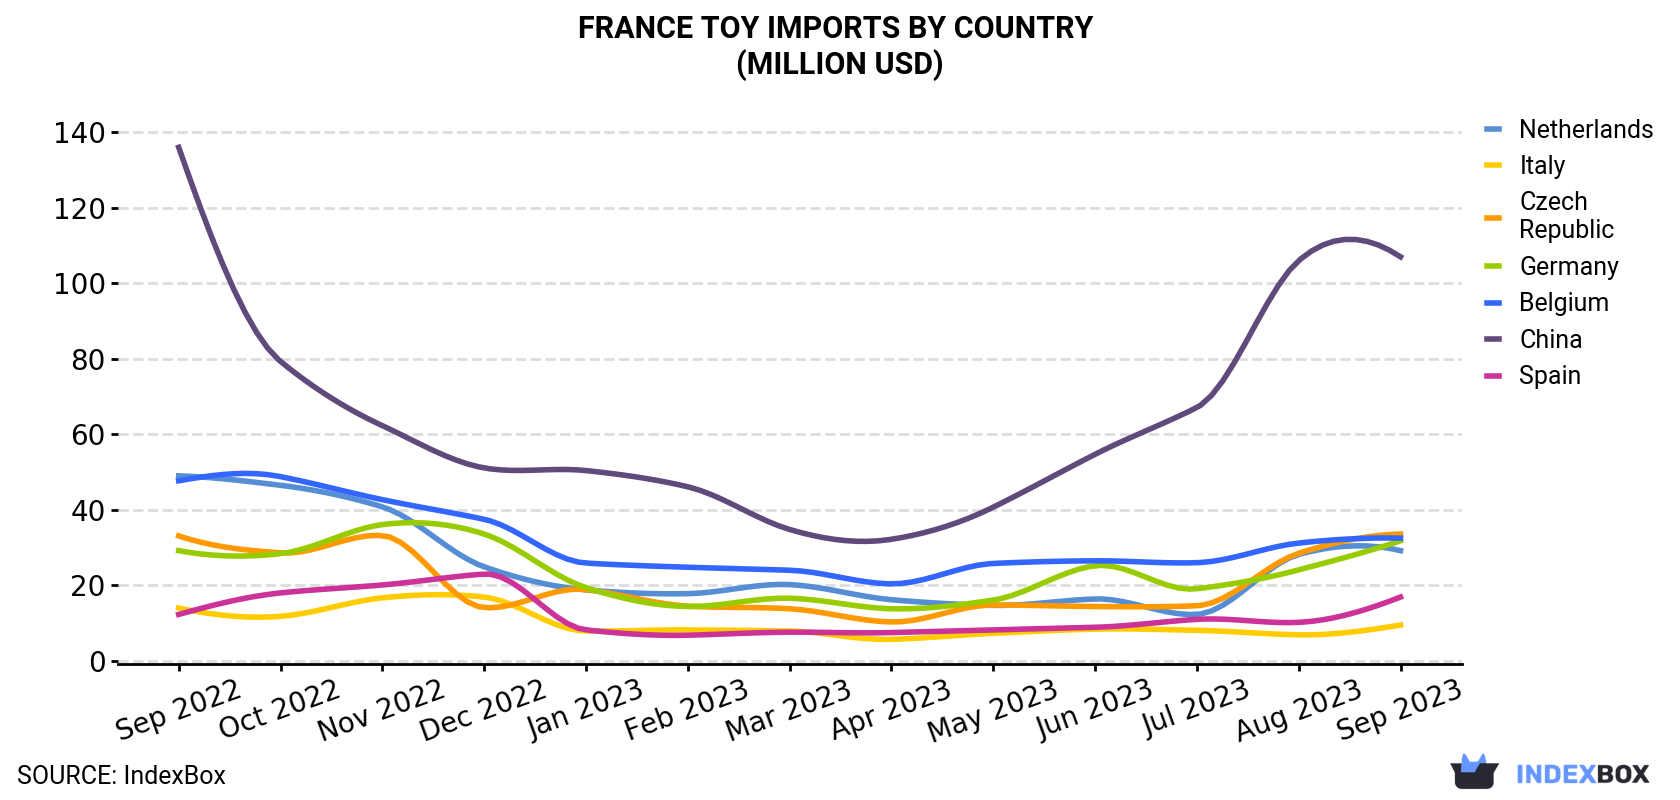 France Toy Imports By Country (Million USD)